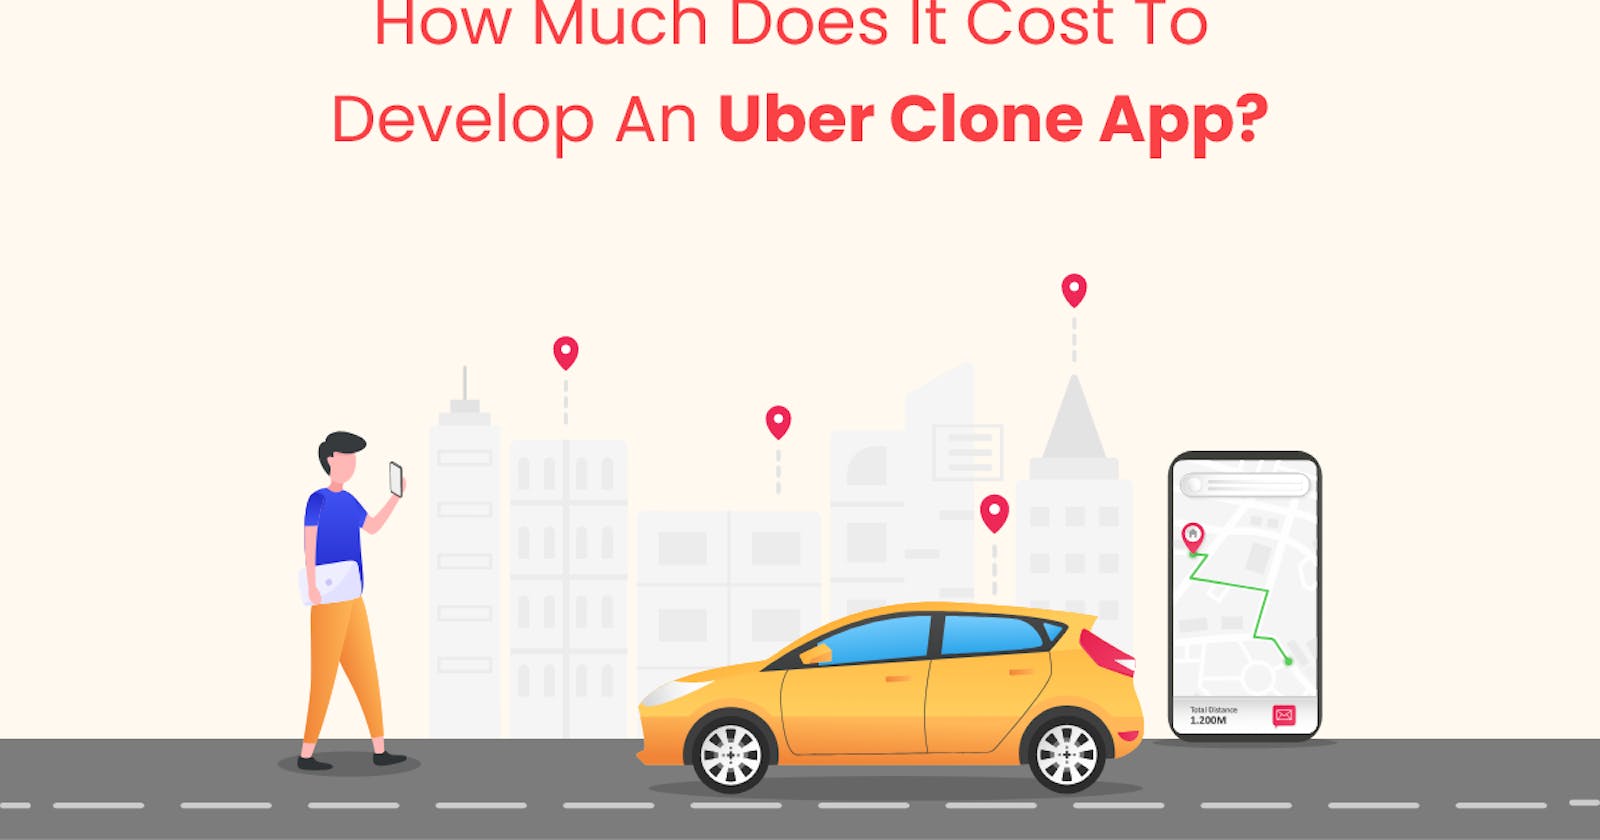 How Much Does It Cost To Develop An Uber Clone App?